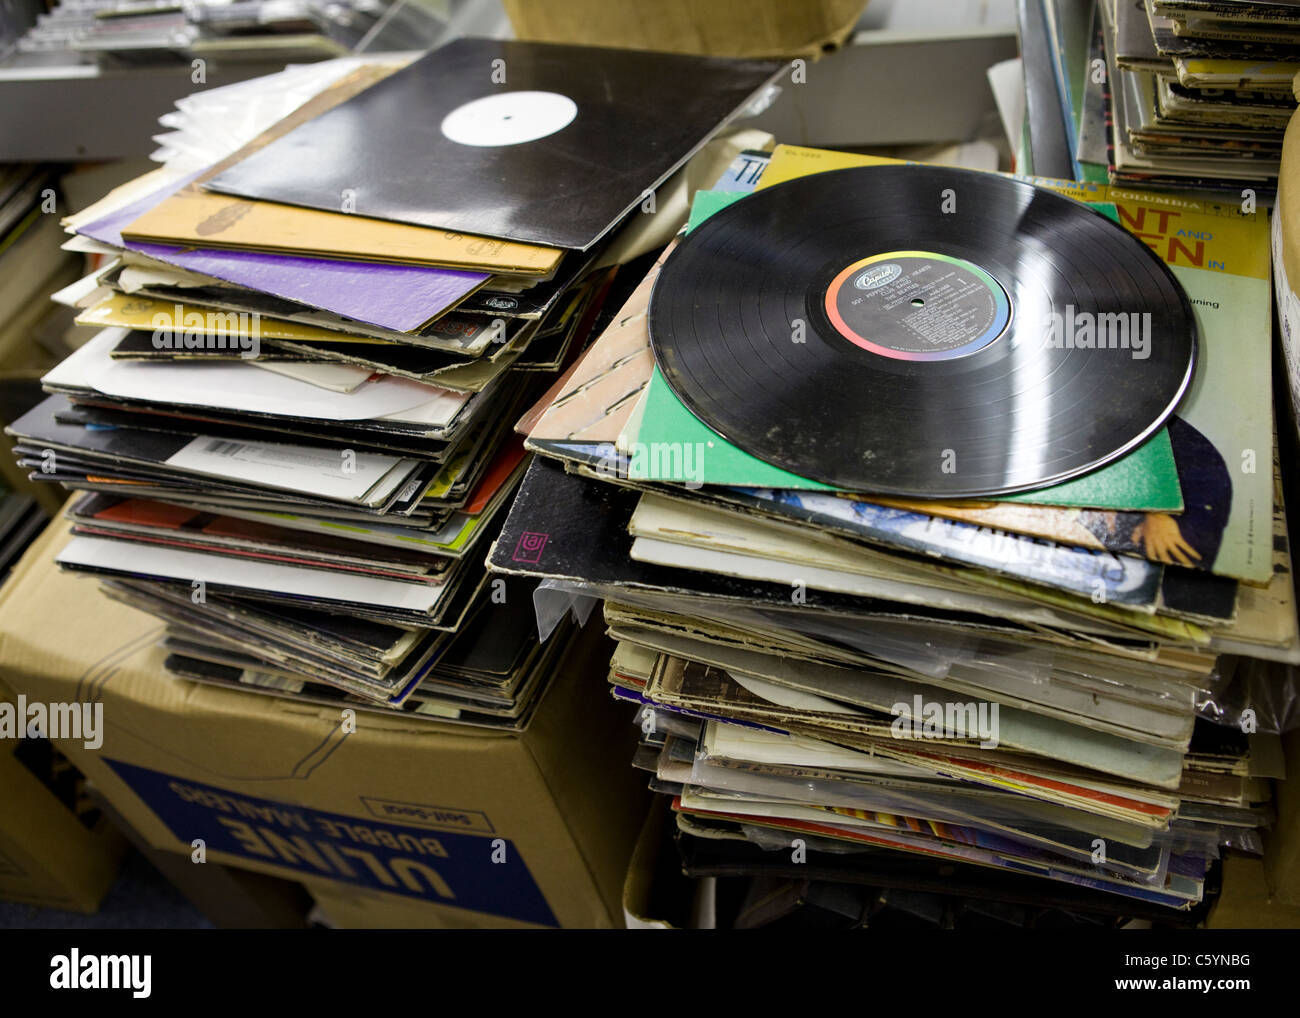 Used vinyl records stacked up for resale Stock Photo